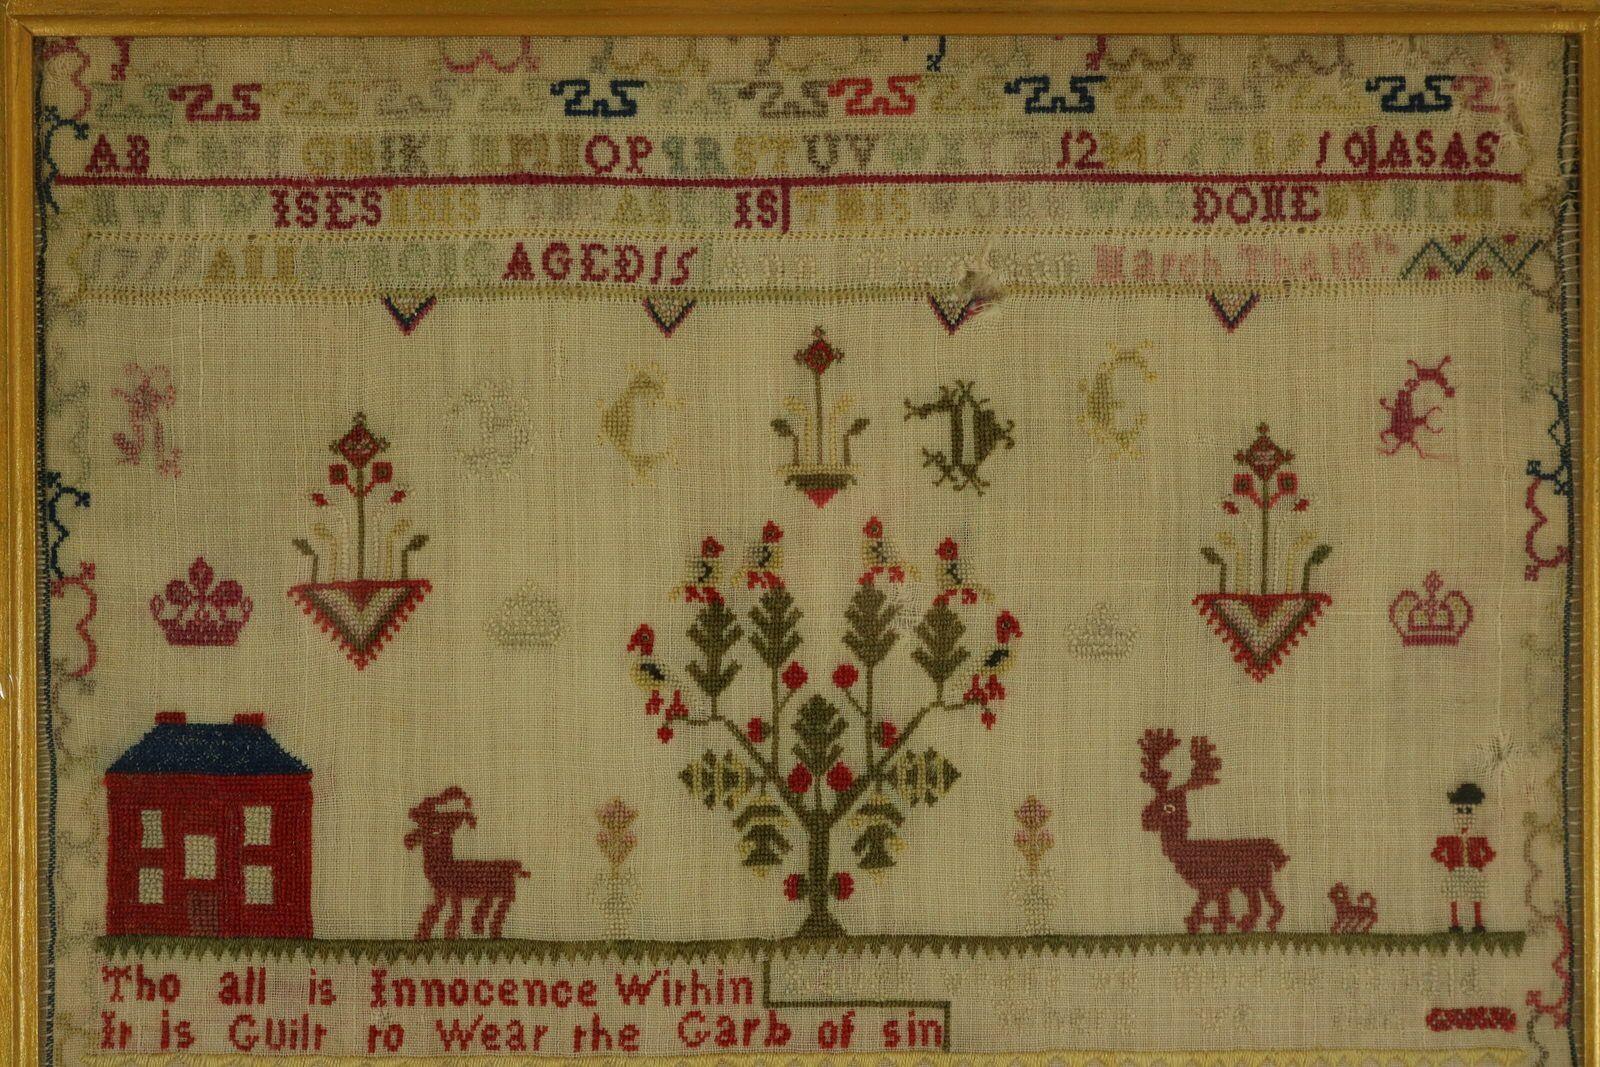 Georgian Sampler, 1799, by Anne Strong. The sampler is worked in fine wool and silk on a linen ground, in cross stitch throughout. Unusual curly border. Colours red, yellow, light brown, pink, green and blue. Alphabets A-Z in upper case, numbers